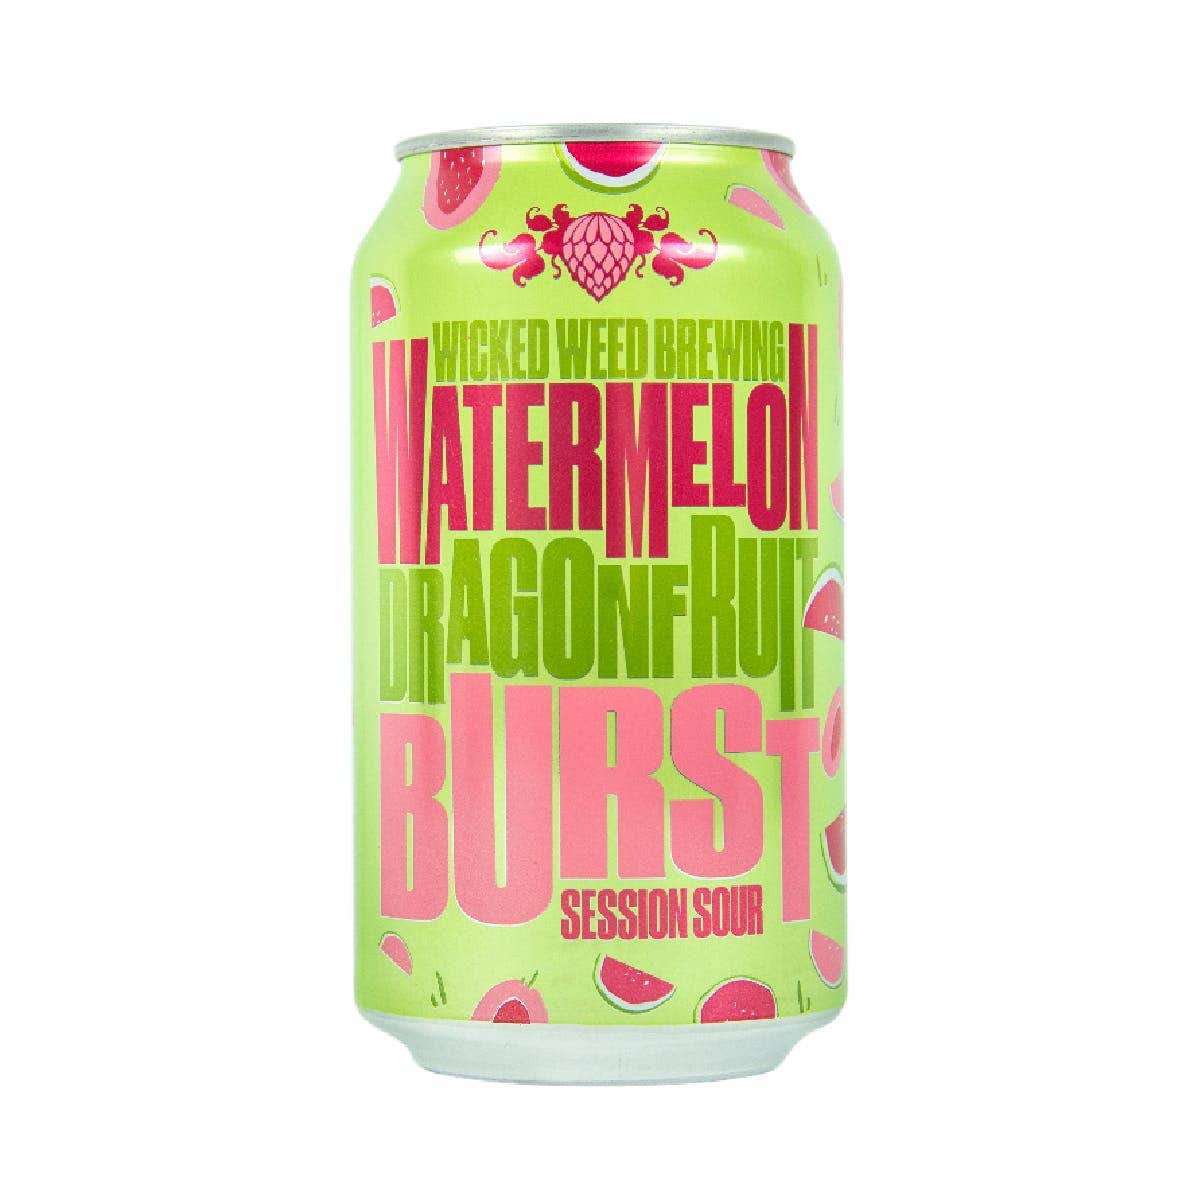 Wicked Weed Brewing Watermelon Dragonfruit Burst